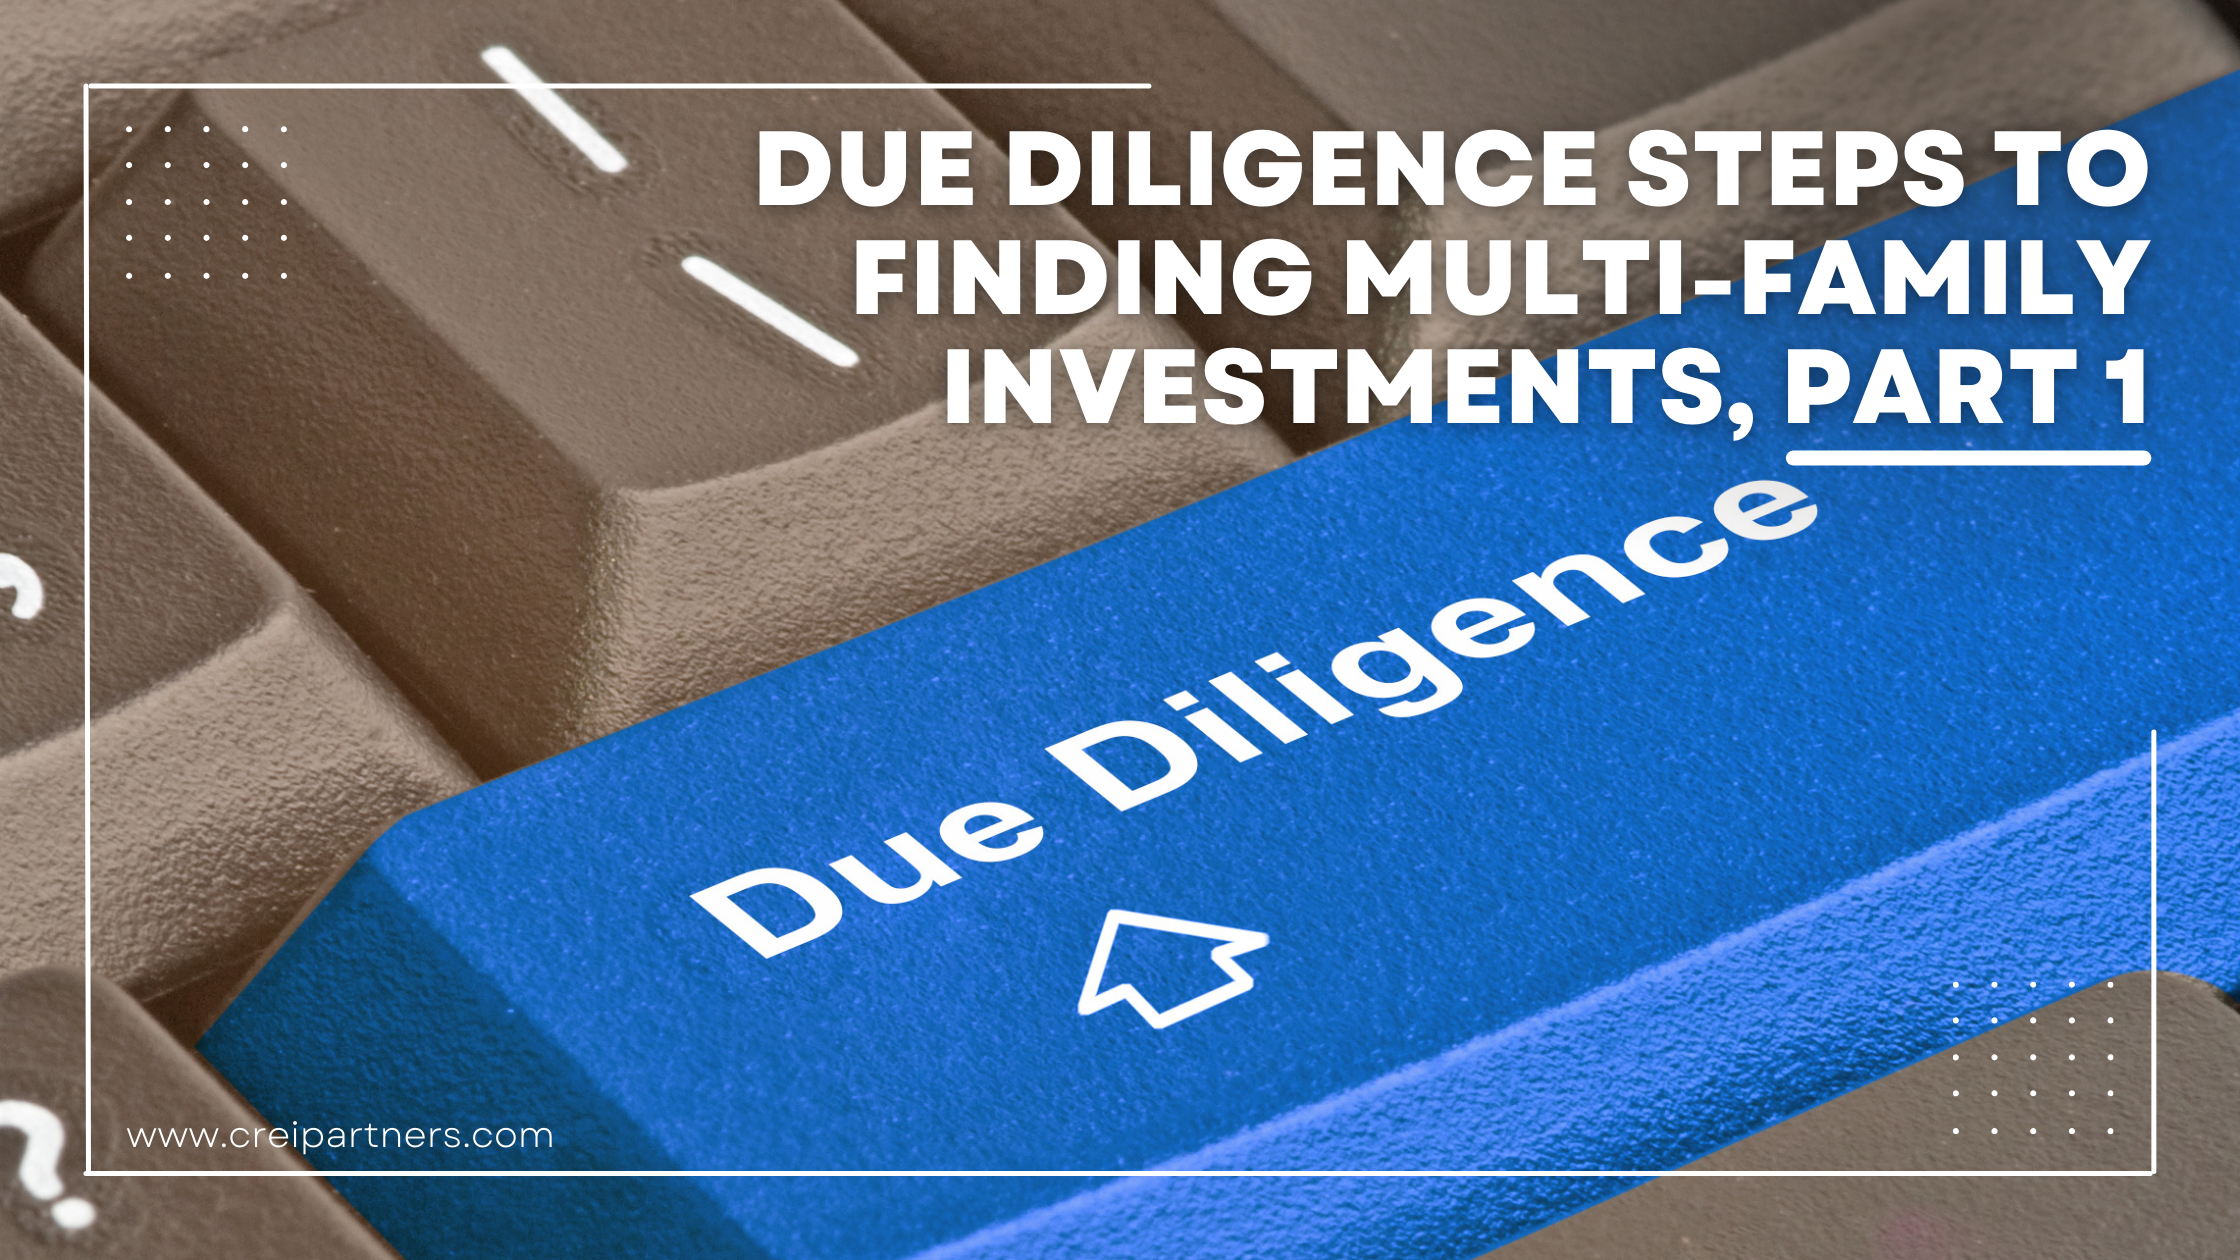 Due Diligence Steps to Finding Multi-Family Investments, Part 1